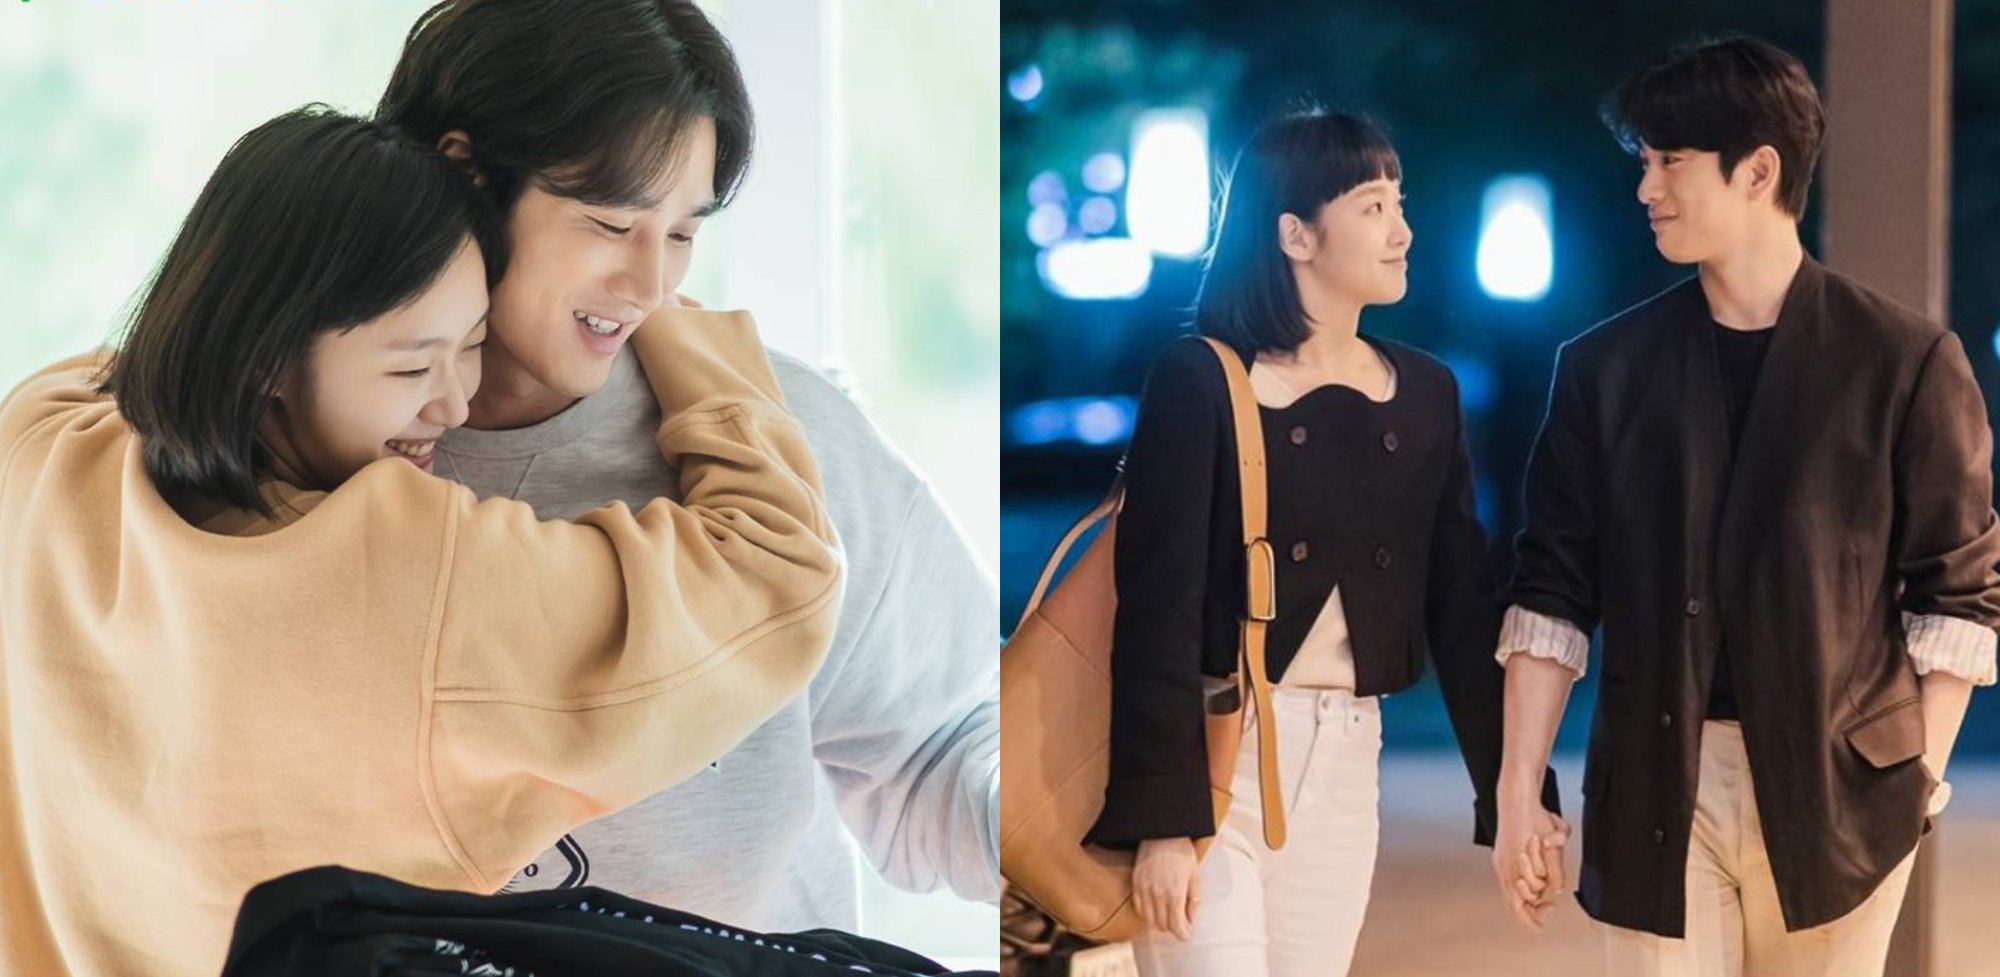 Yu-mi dating Woong and Babi in 'Yumi's Cells' and Season 2